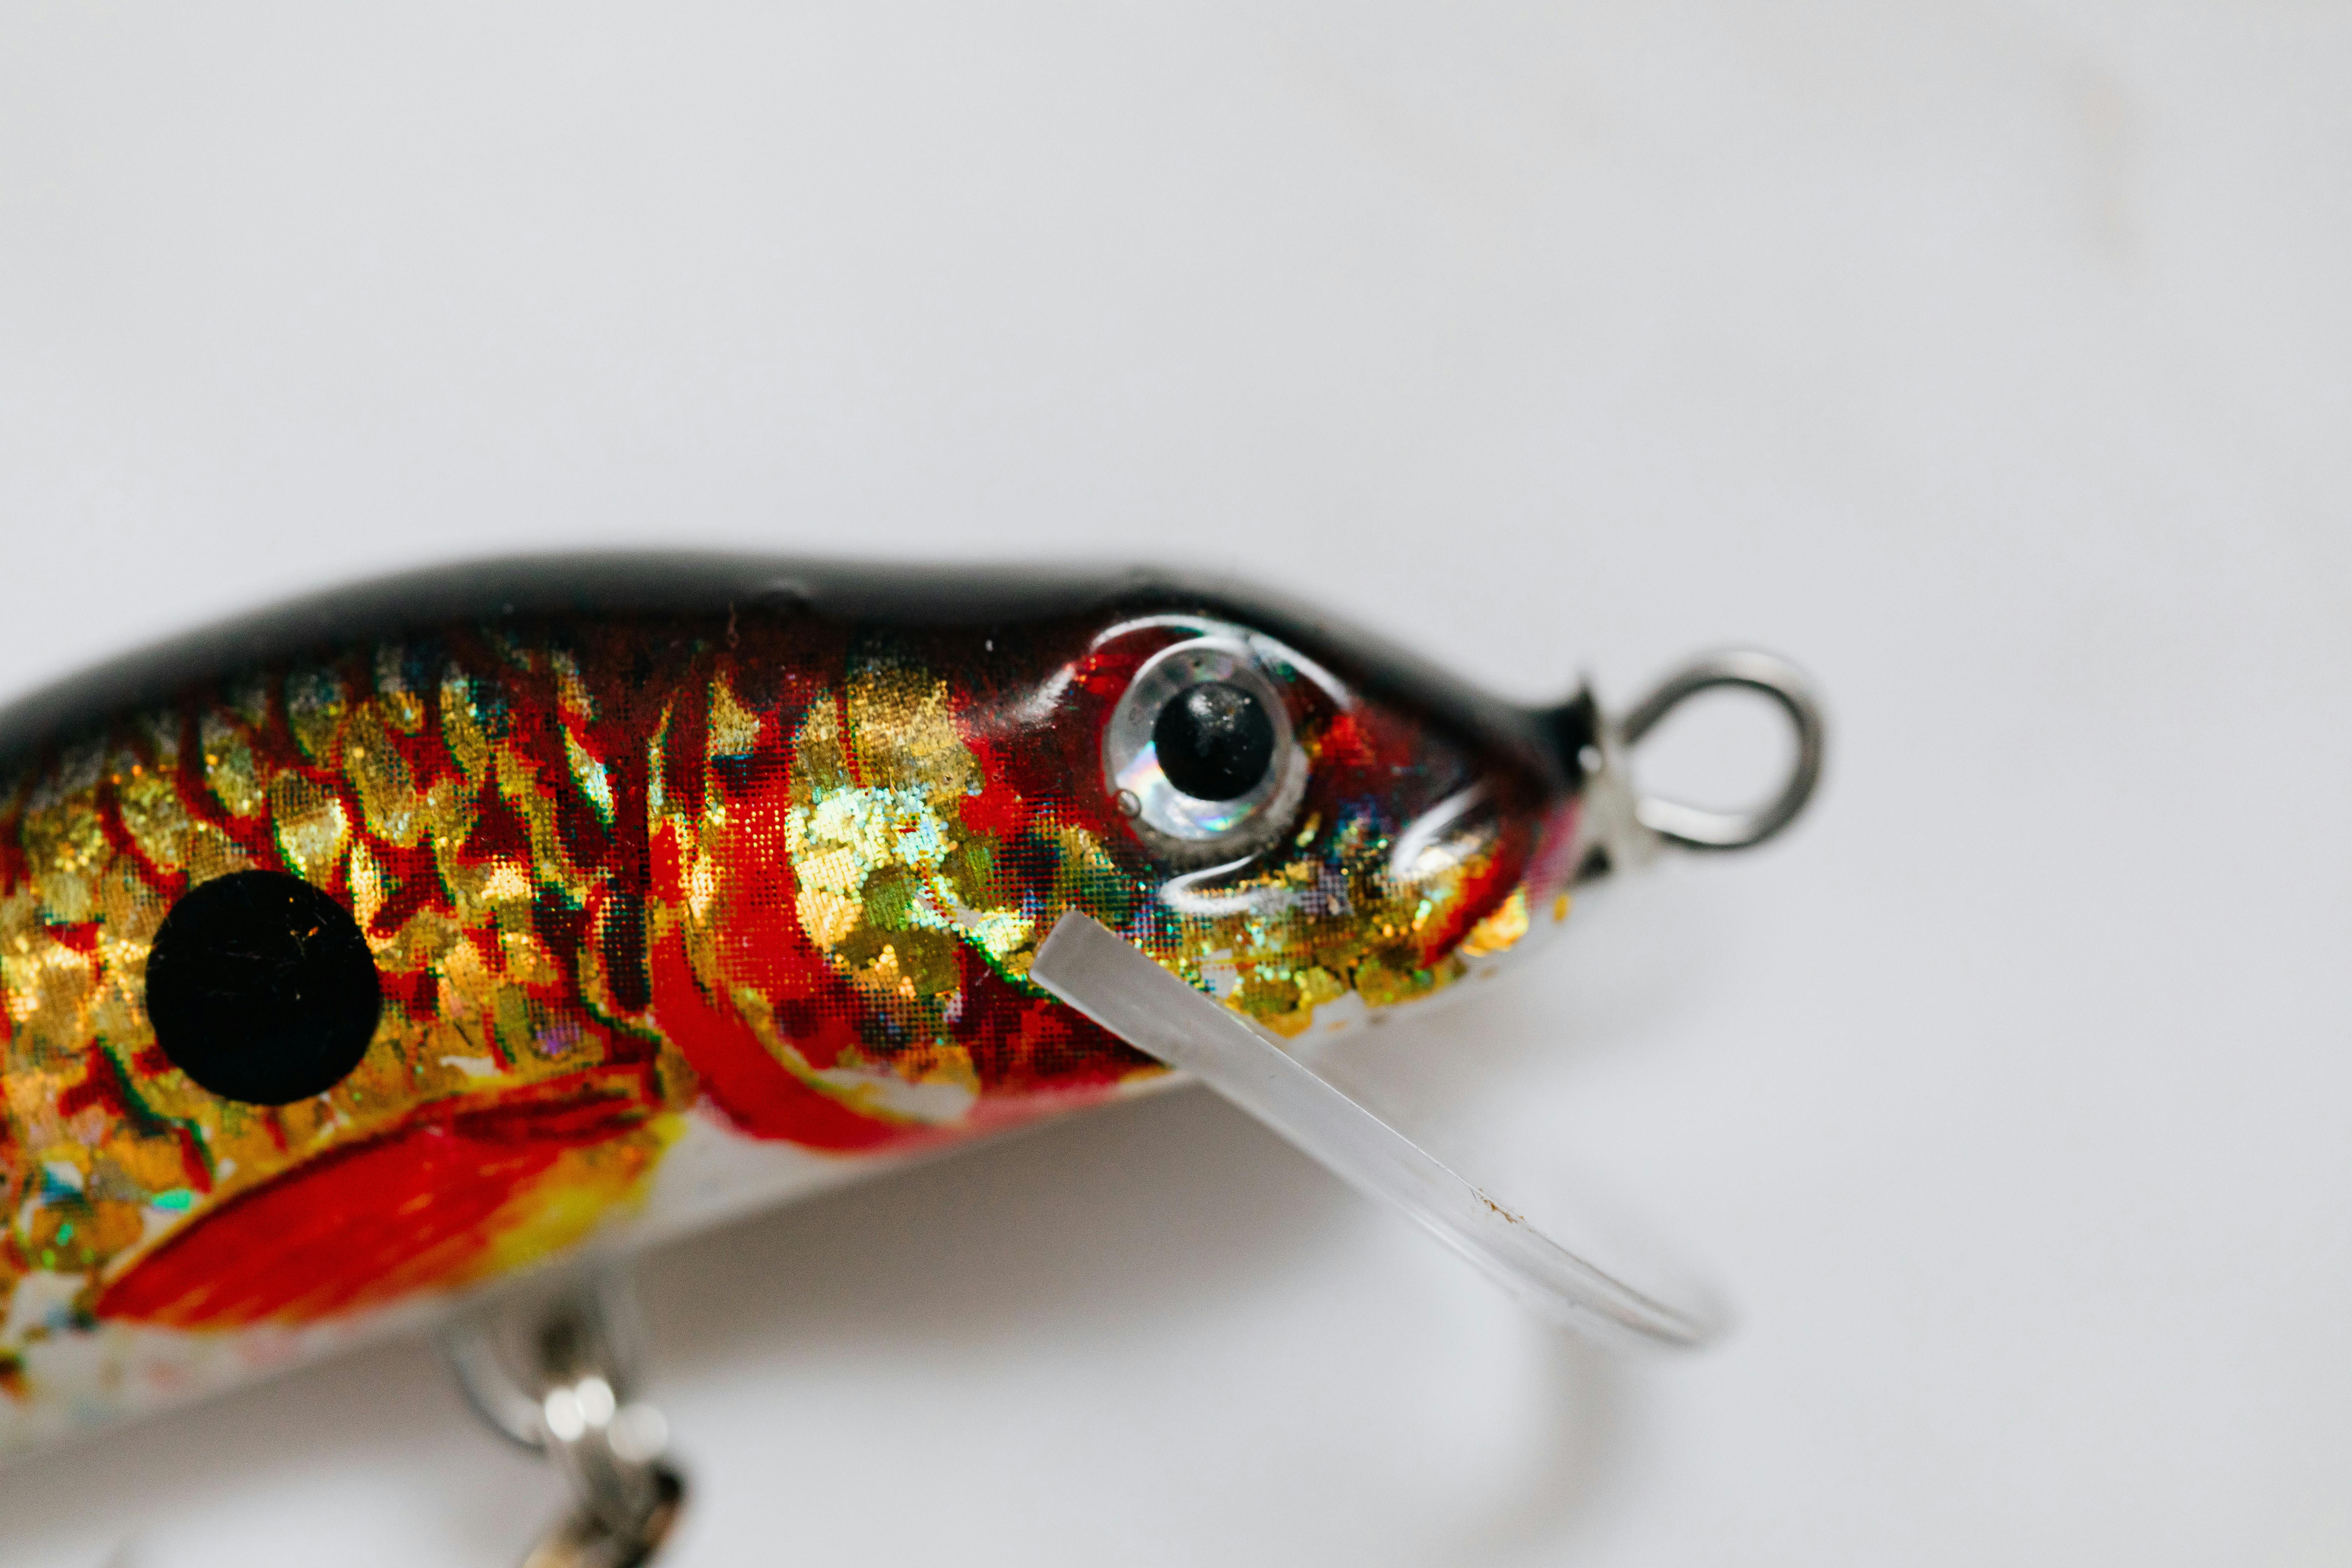 Artificial Bait in Close Up · Free Stock Photo